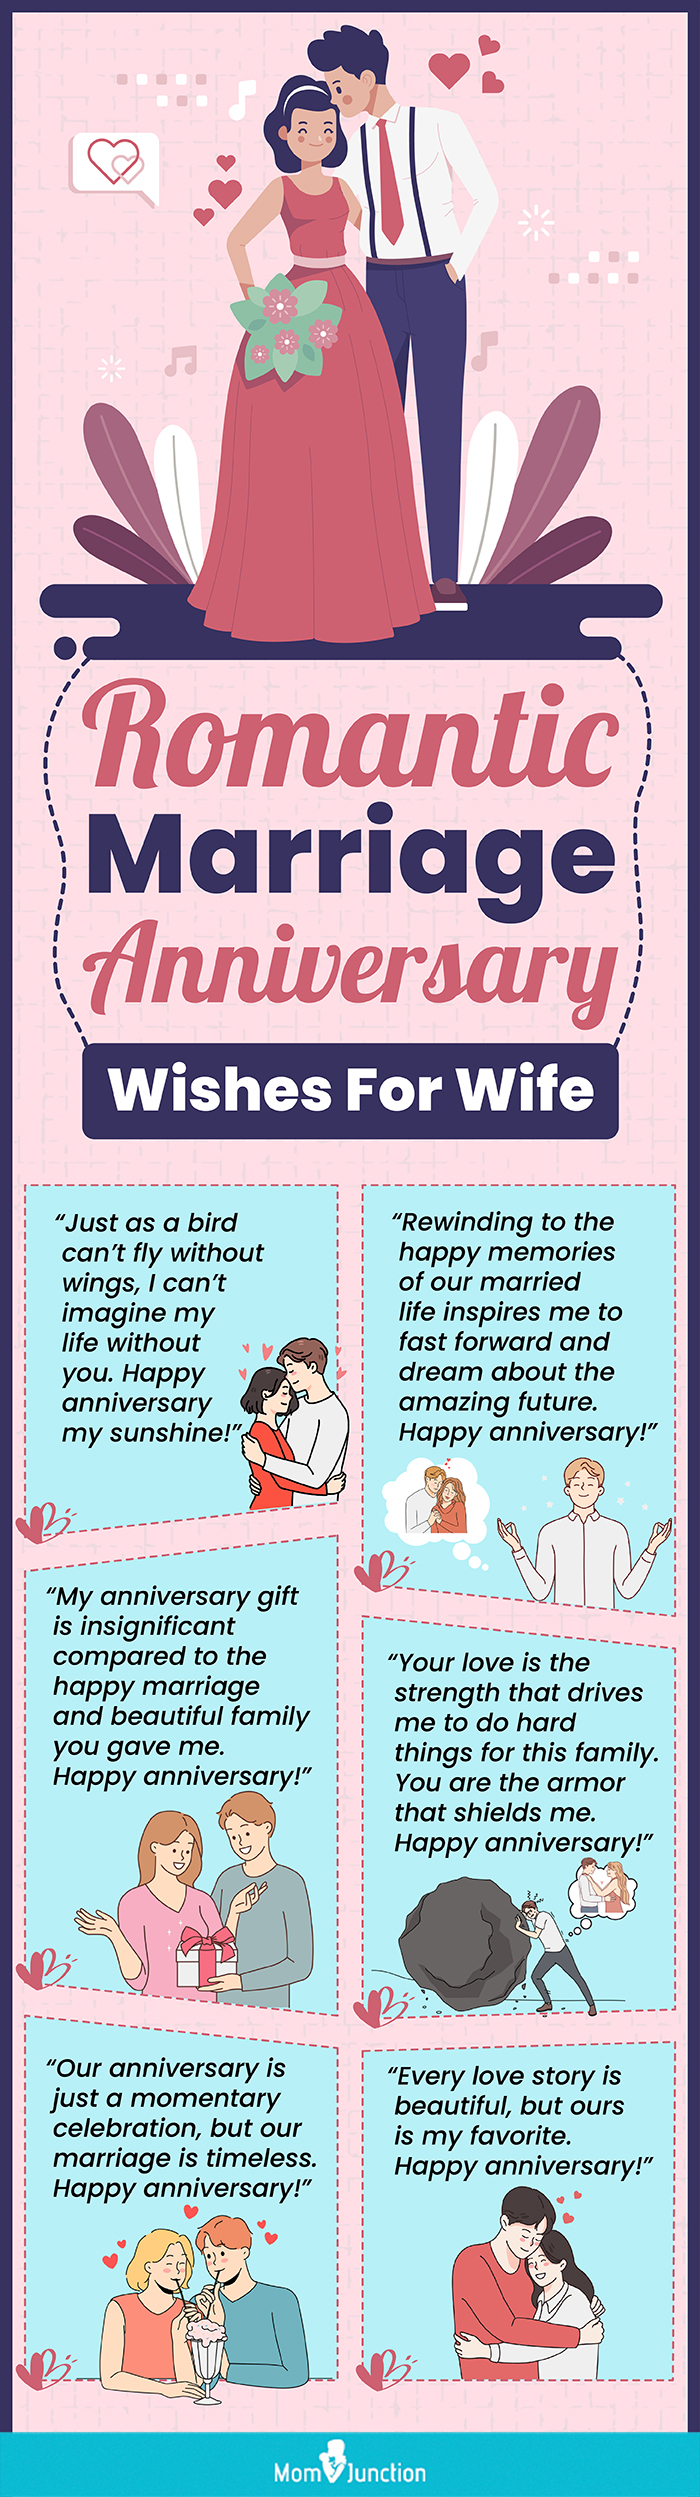 marriage anniversary wishes for wife (infographic)